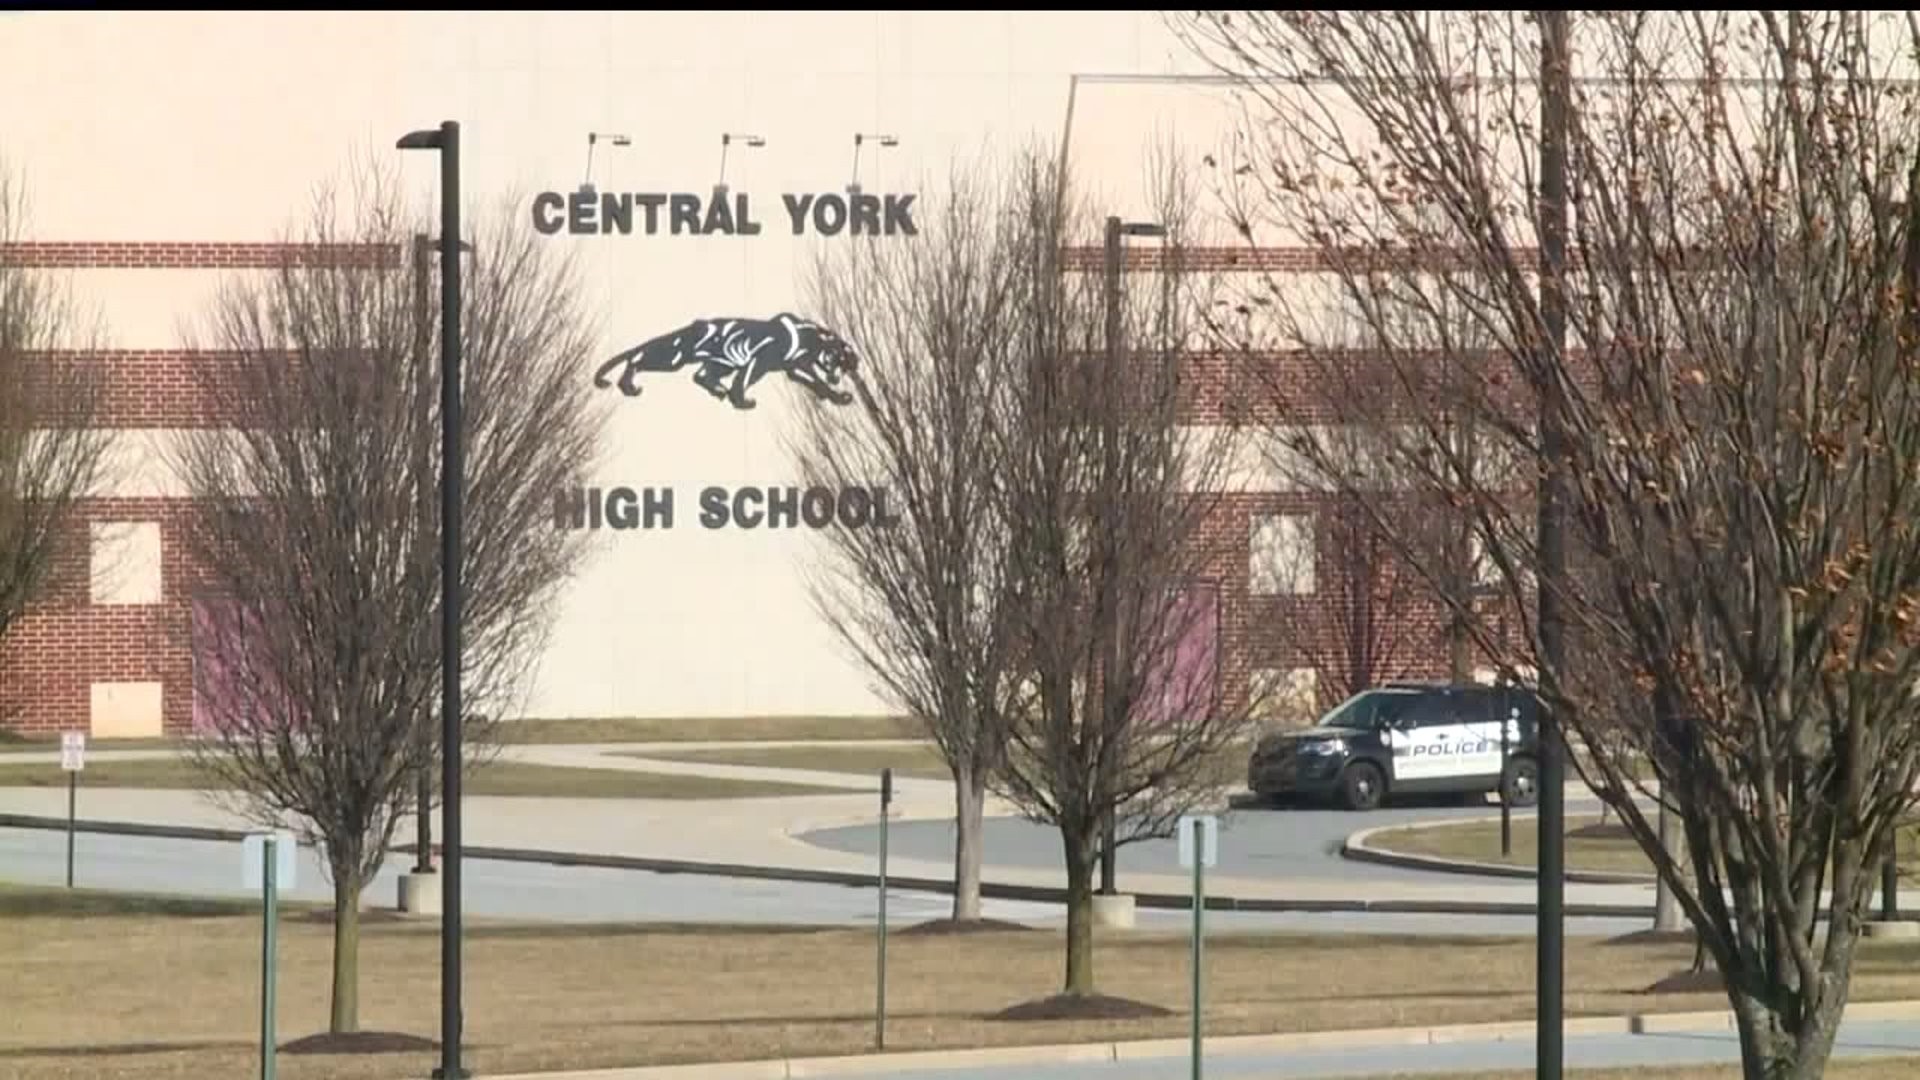 Students are returning to classes today in the Central York School District